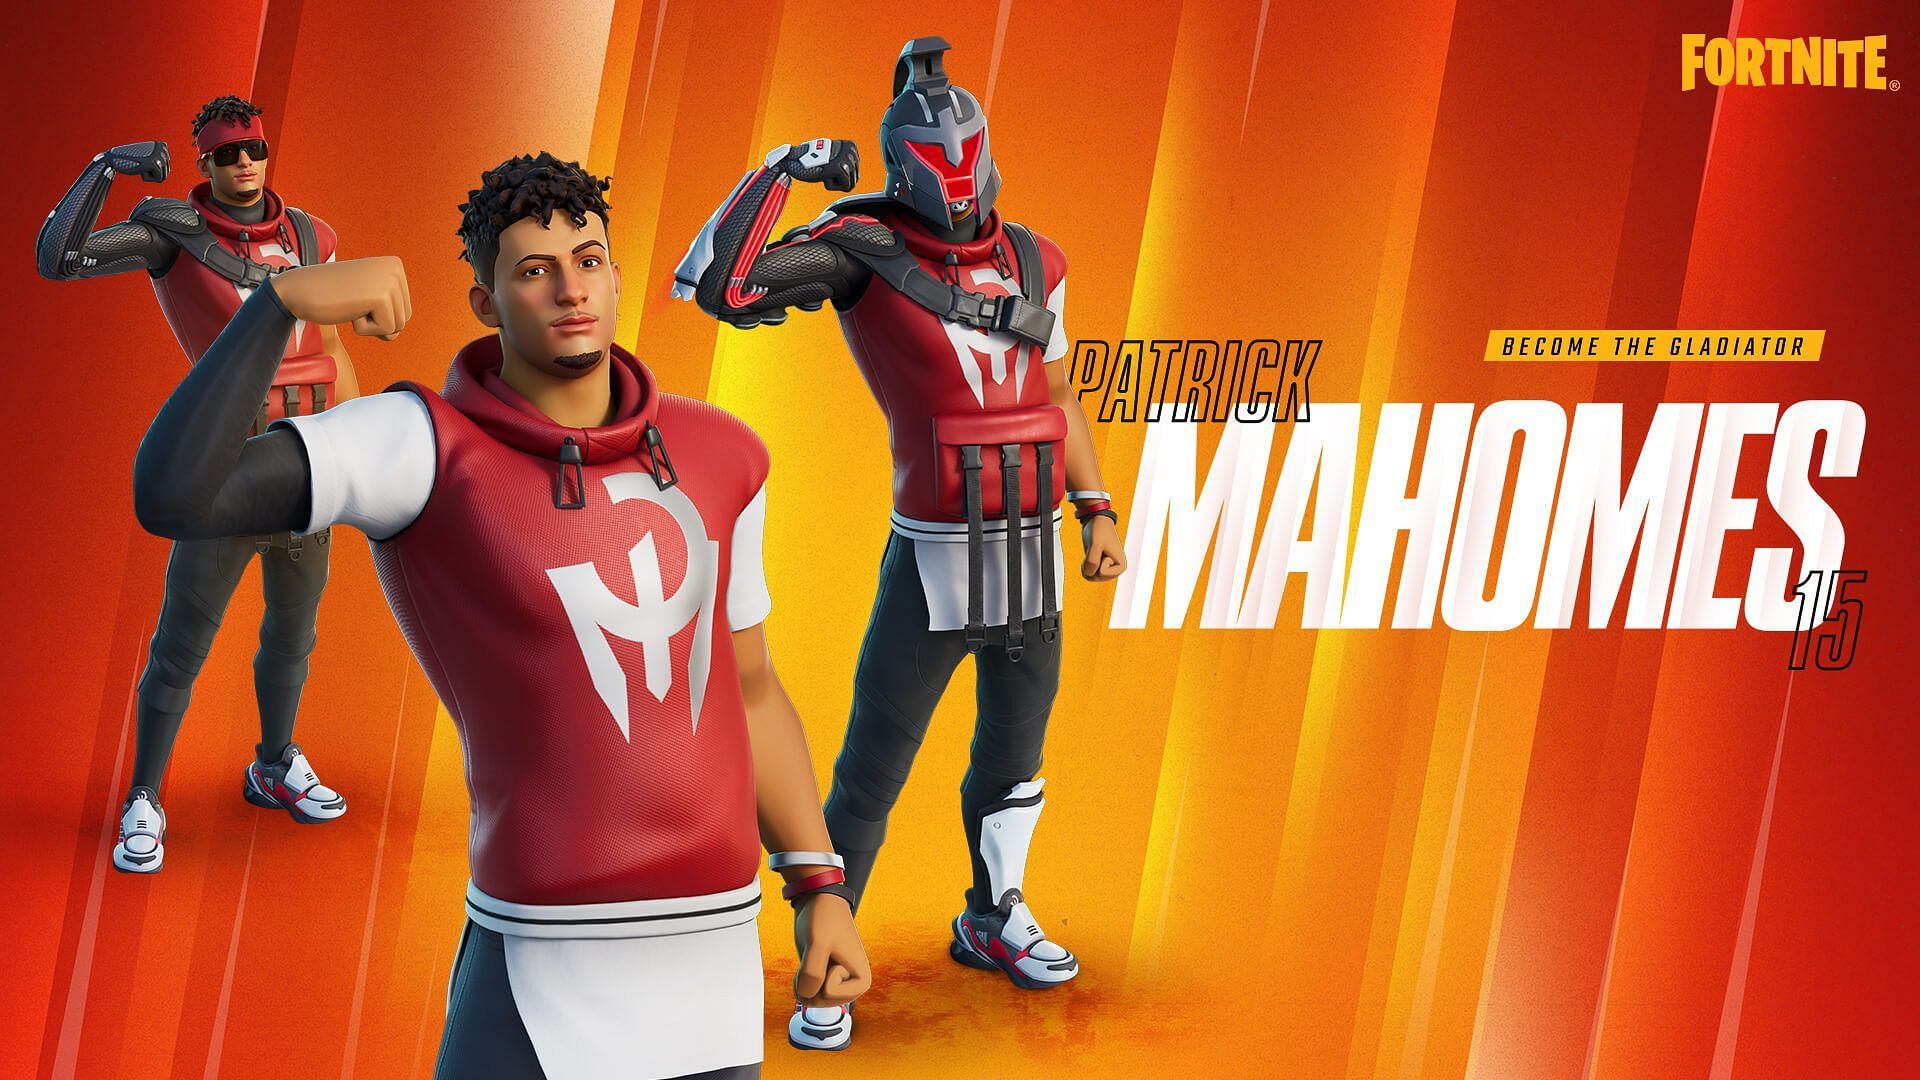 Fortnite players have a chance to earn the Patrick Mahomes skin for free (Image via Epic Games)